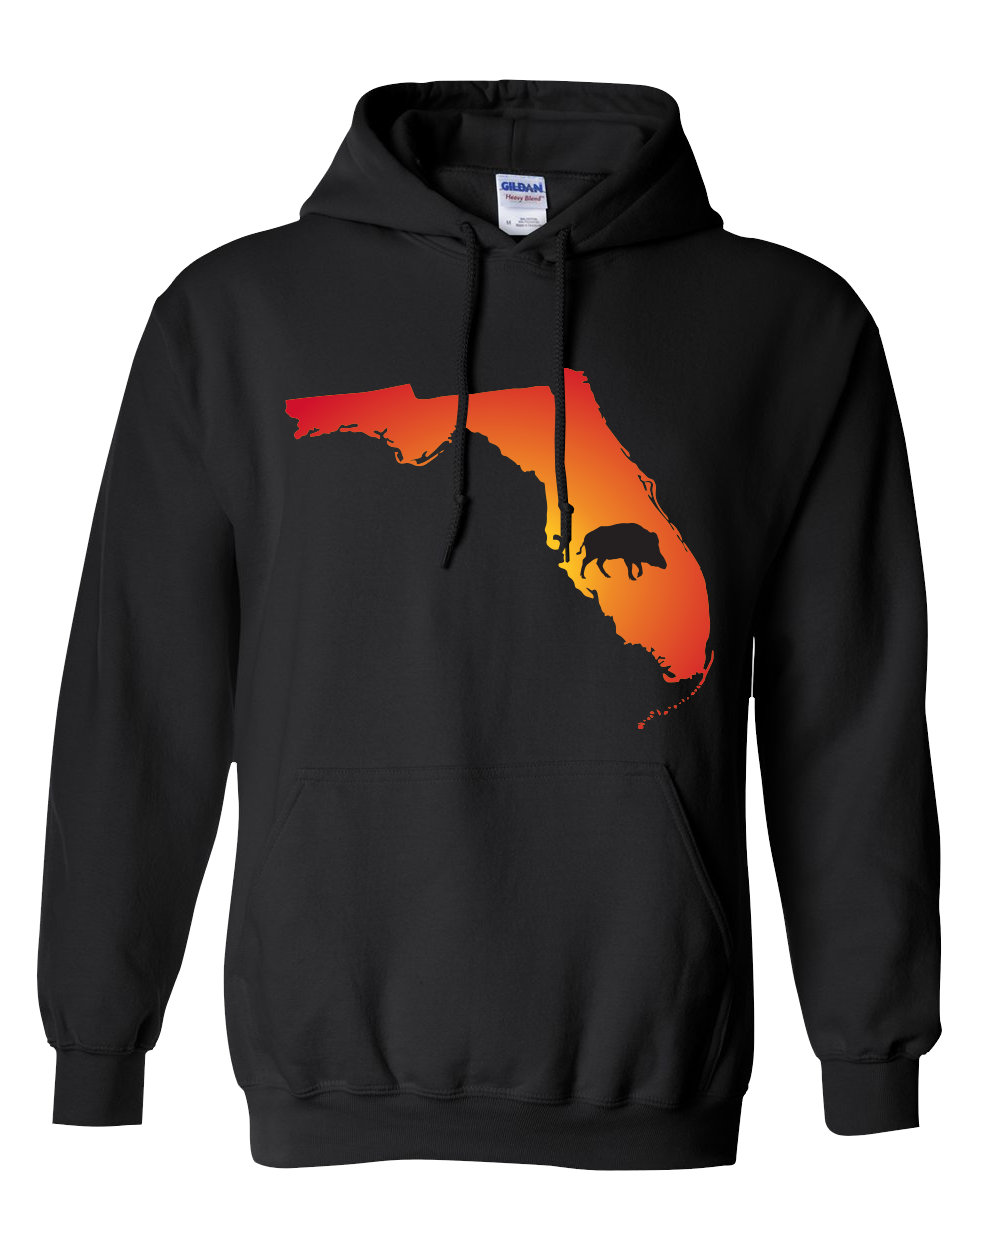 Pullover Hooded Sweatshirt Florida Black Wild Hog Vibrant Design High Quality Tight Knit Ring Spun Low Maintenance Cotton Printed With The Newest Available Color Transfer Technology